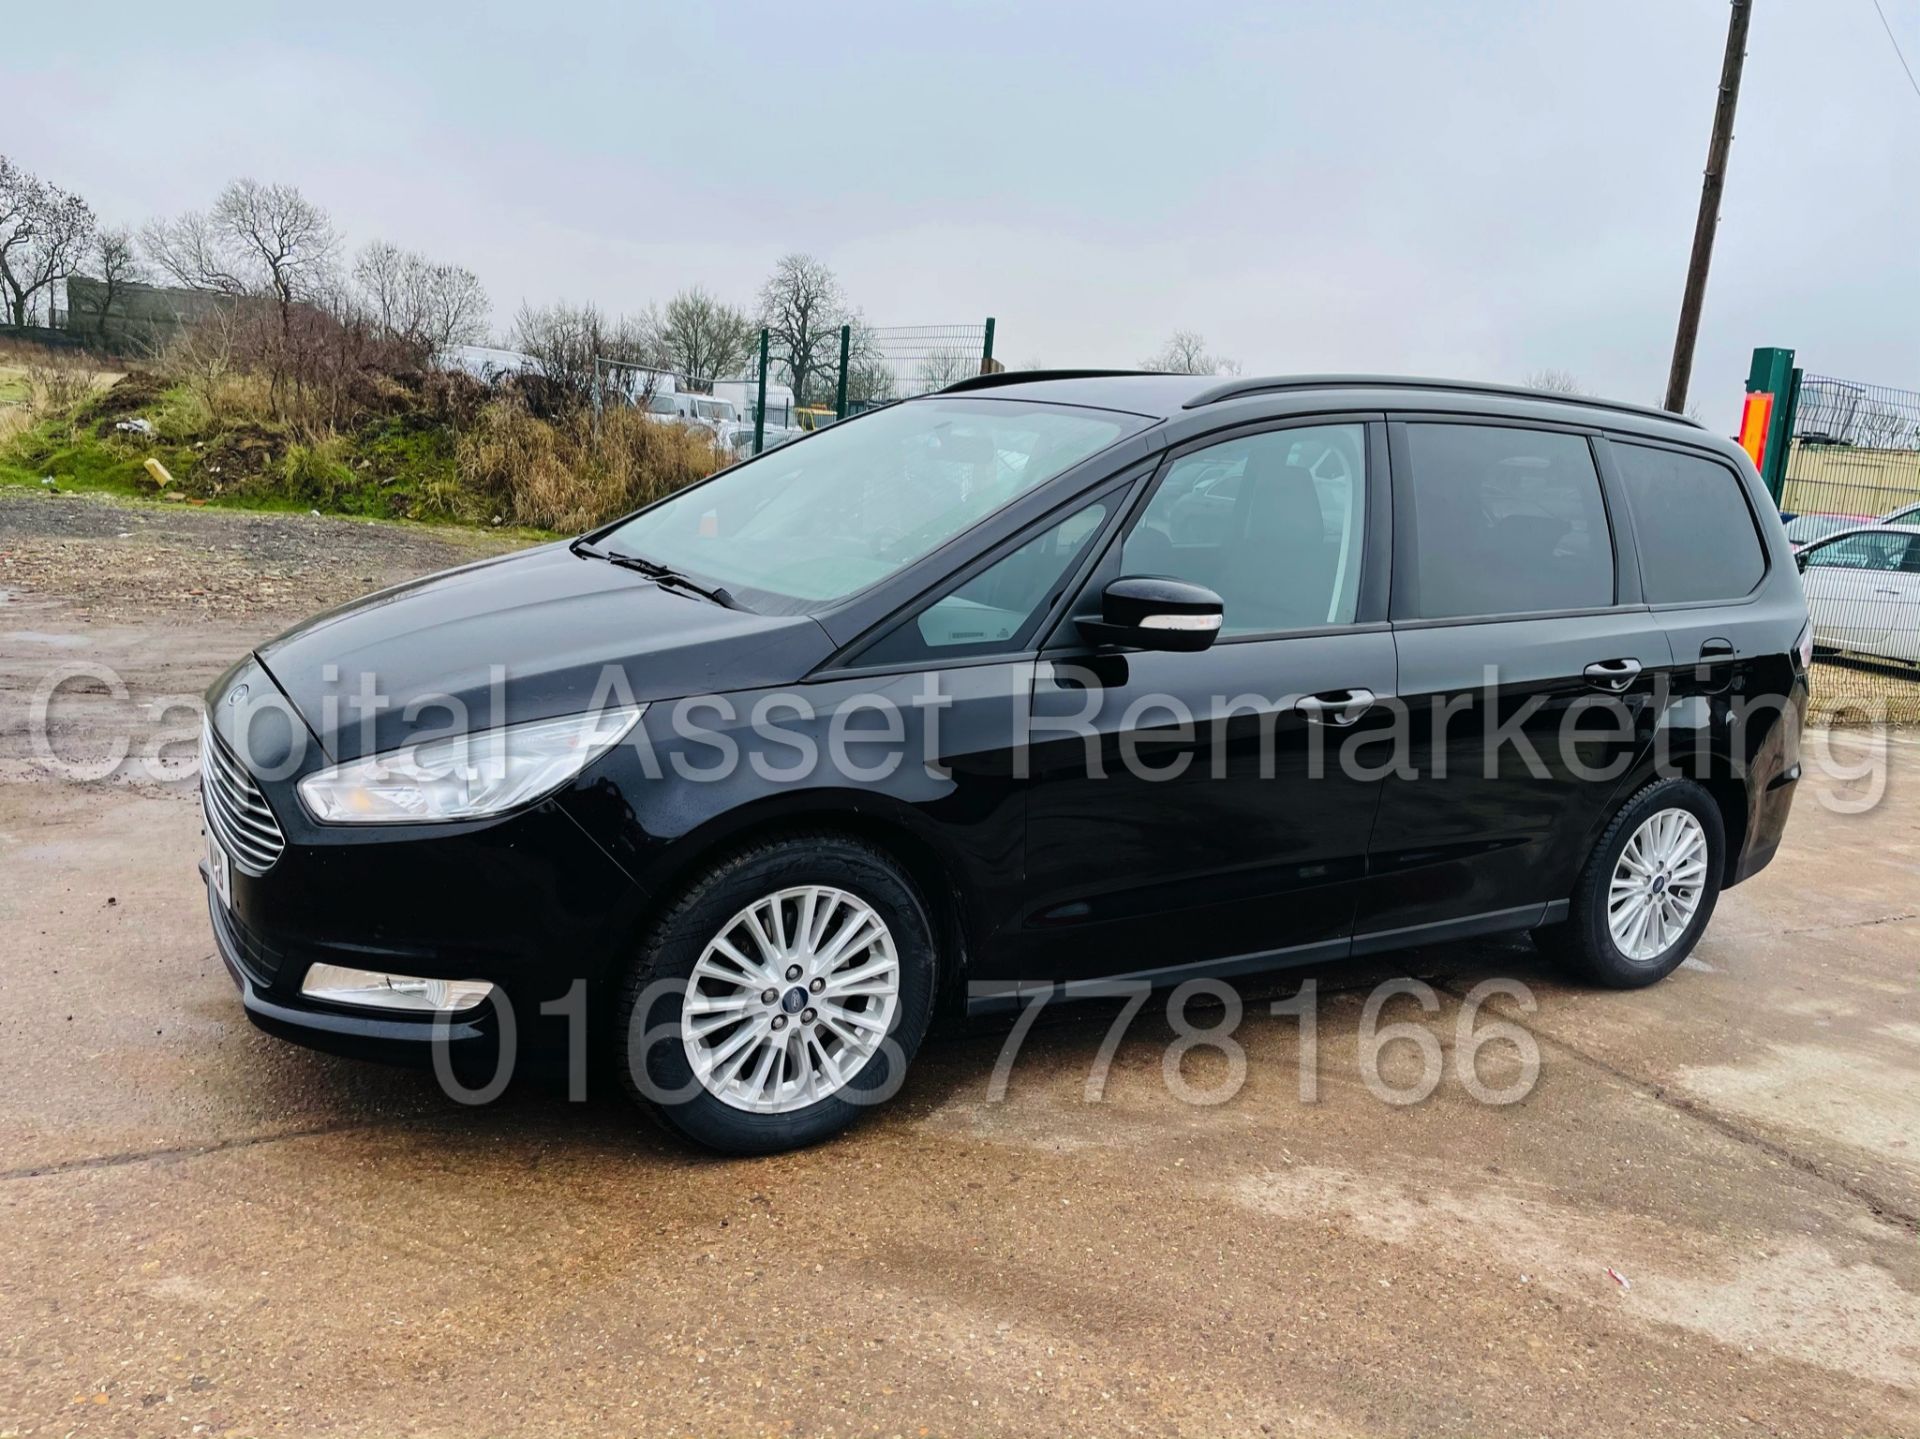 (ON SALE) FORD GALAXY *ZETEC EDITION* 7 SEATER MPV (2017 - EURO 6) '2.0 TDCI - AUTO' (1 OWNER)